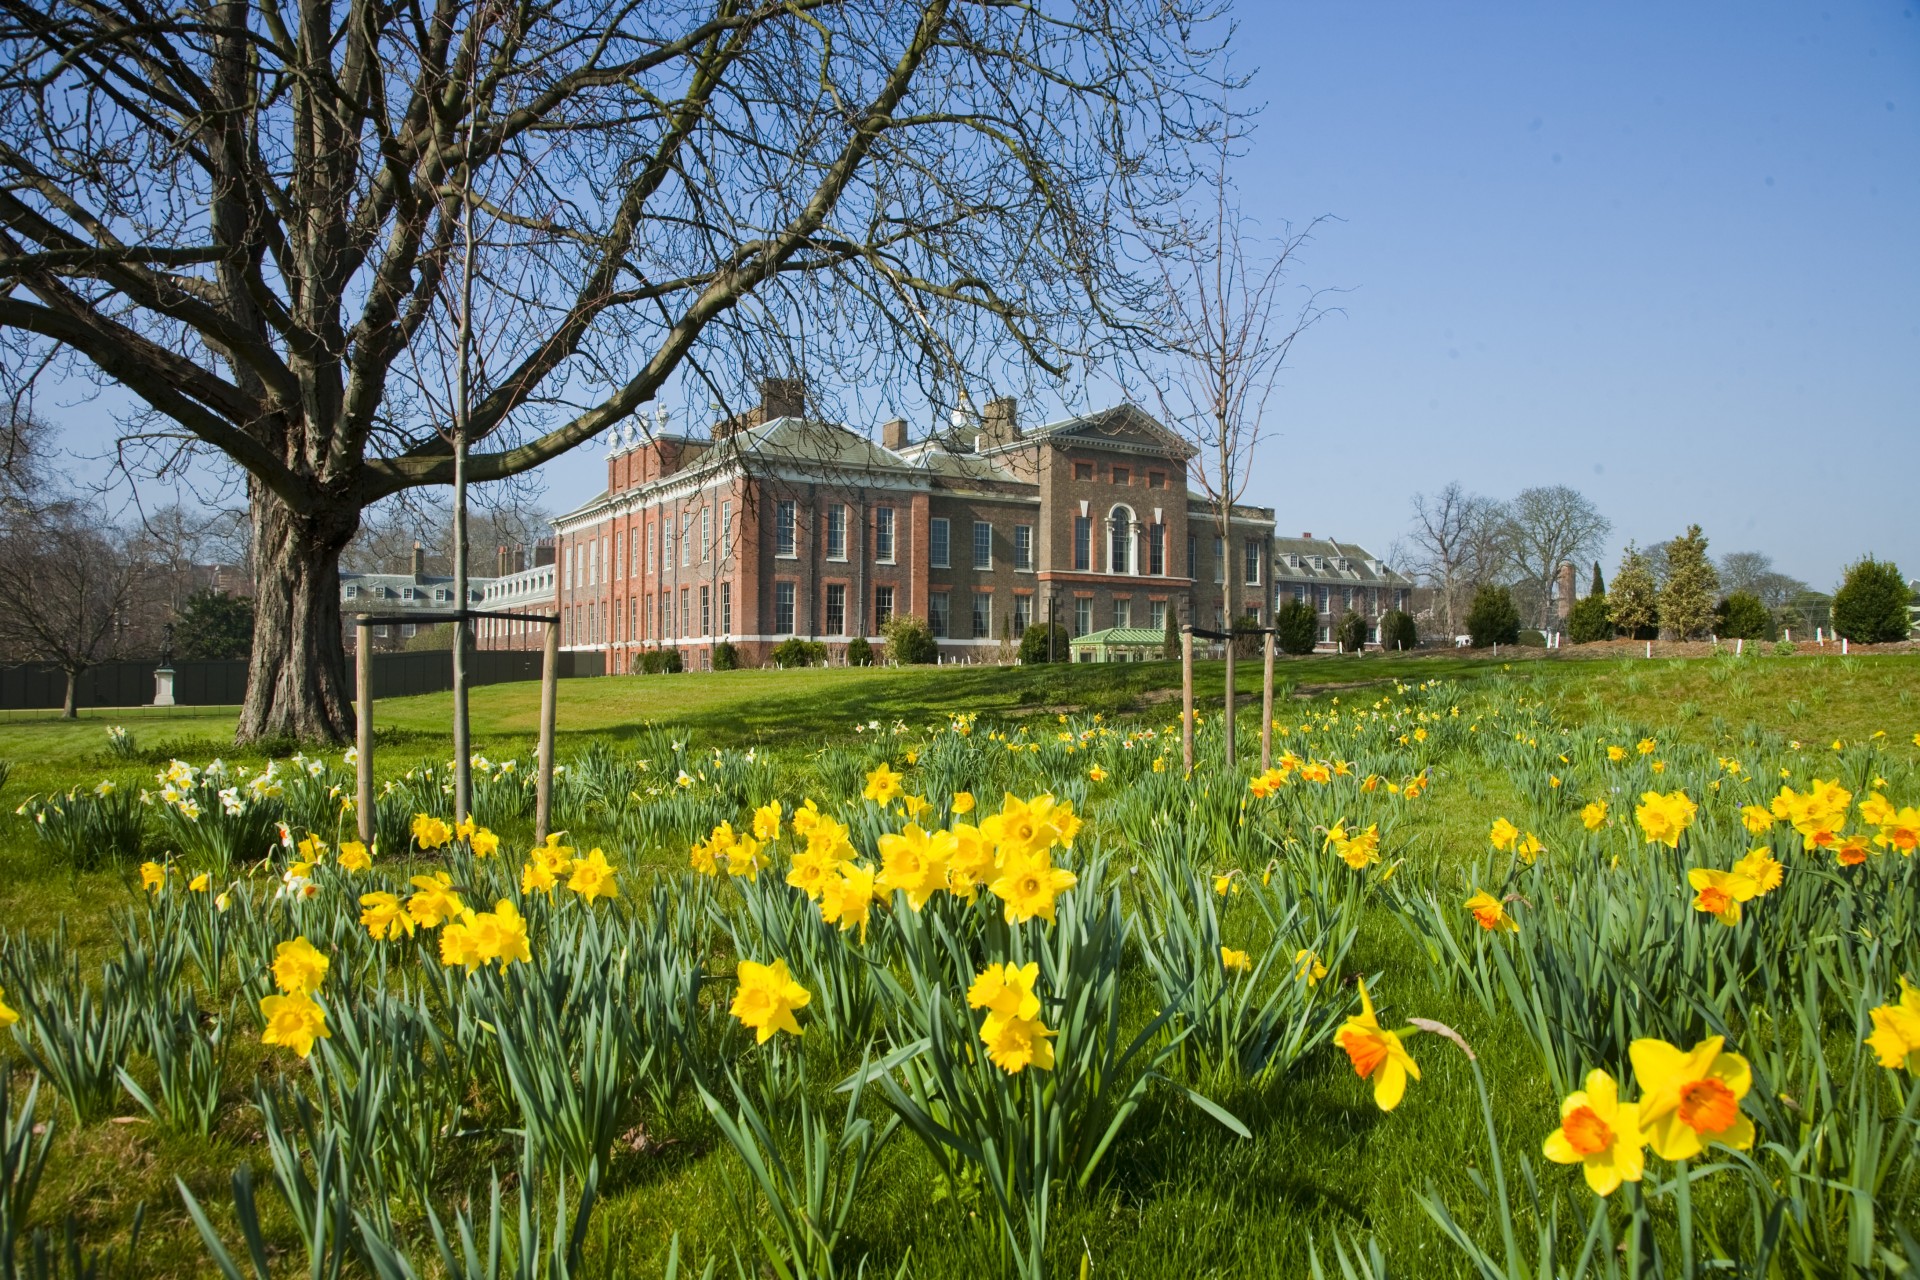 Kensington Palace - Springtime daffodils bloom in the east front gardens.